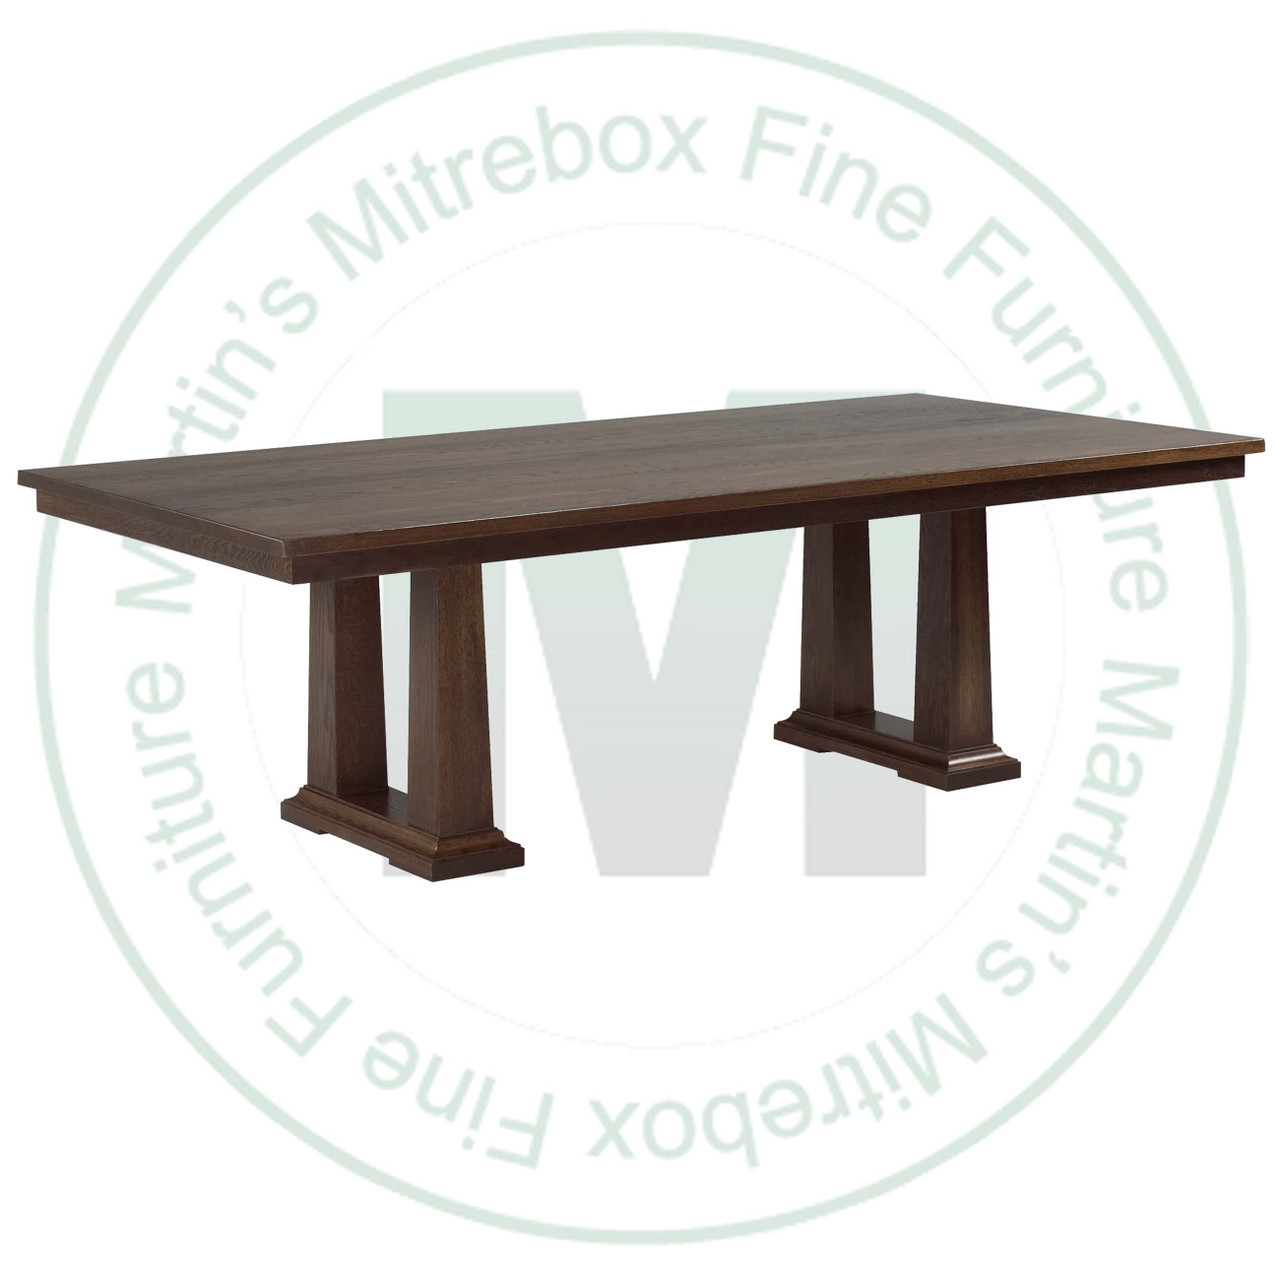 Maple Acropolis Extension Double Pedestal Table 42''D x 72''W x 30''H With 2 - 12'' Leaves Table Has 1.75'' Thick Top